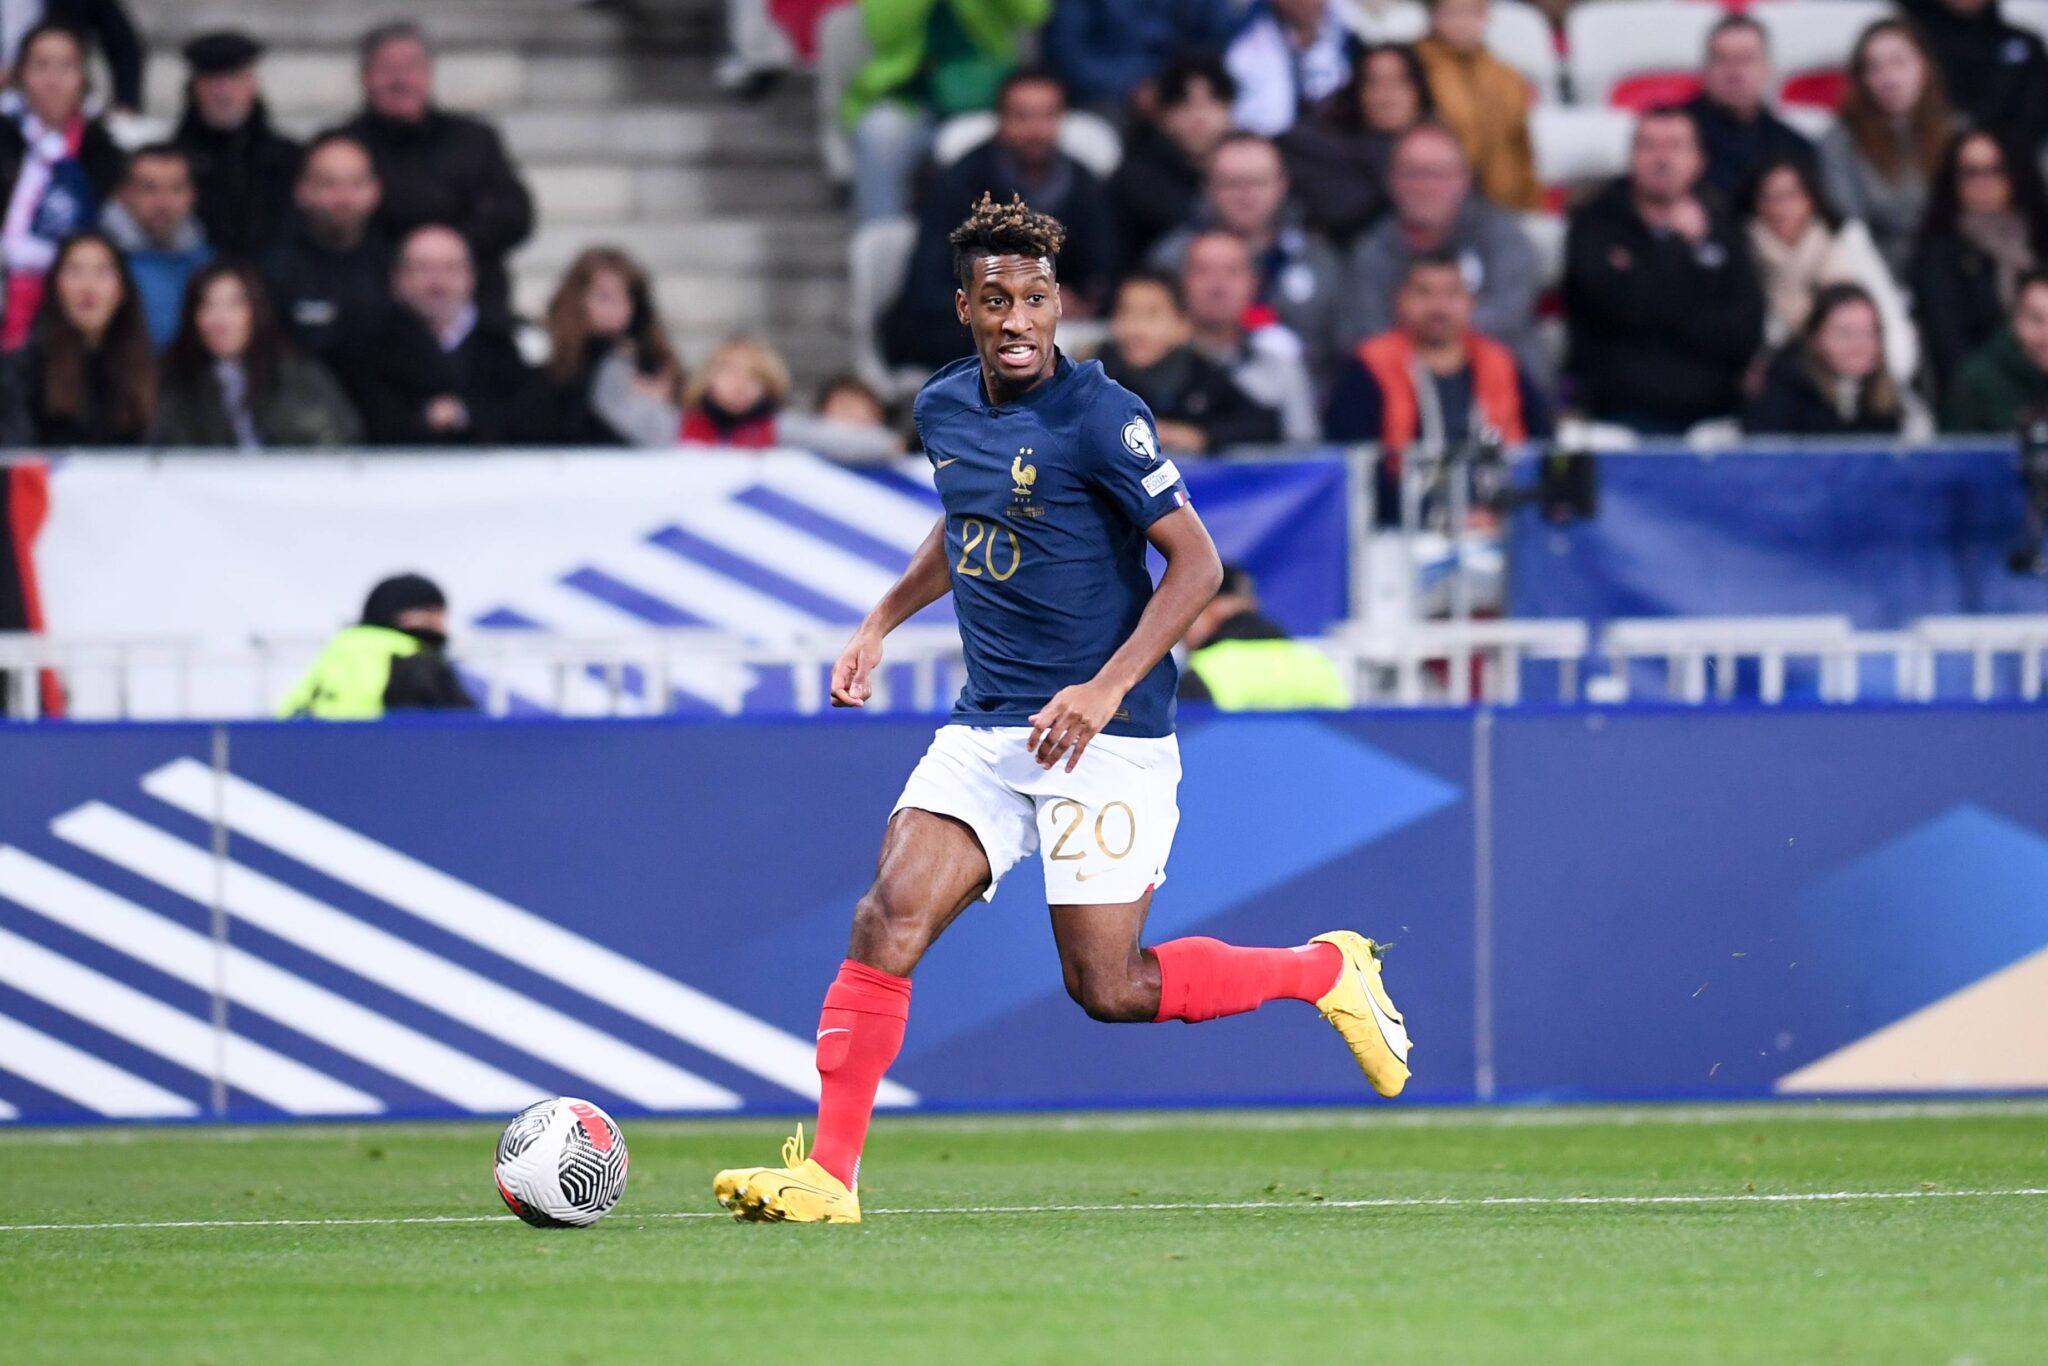 20 Kingsley COMAN (fra) during the UEFA Euro 2024, qualifications match between France and Gibraltar at Allianz Riviera on November 18, 2023 in Nice, France. (Photo by Philippe Lecoeur/FEP/Icon Sport) 
PILKA NOZNA ELIMINACJE MISTRZOSTW EUROPY FRANCJA - GIBRALTAR
FOT. ICON SPORT/newspix.pl / 400mm.pl
POLAND ONLY!!!
---
newspix.pl / 400mm.pl